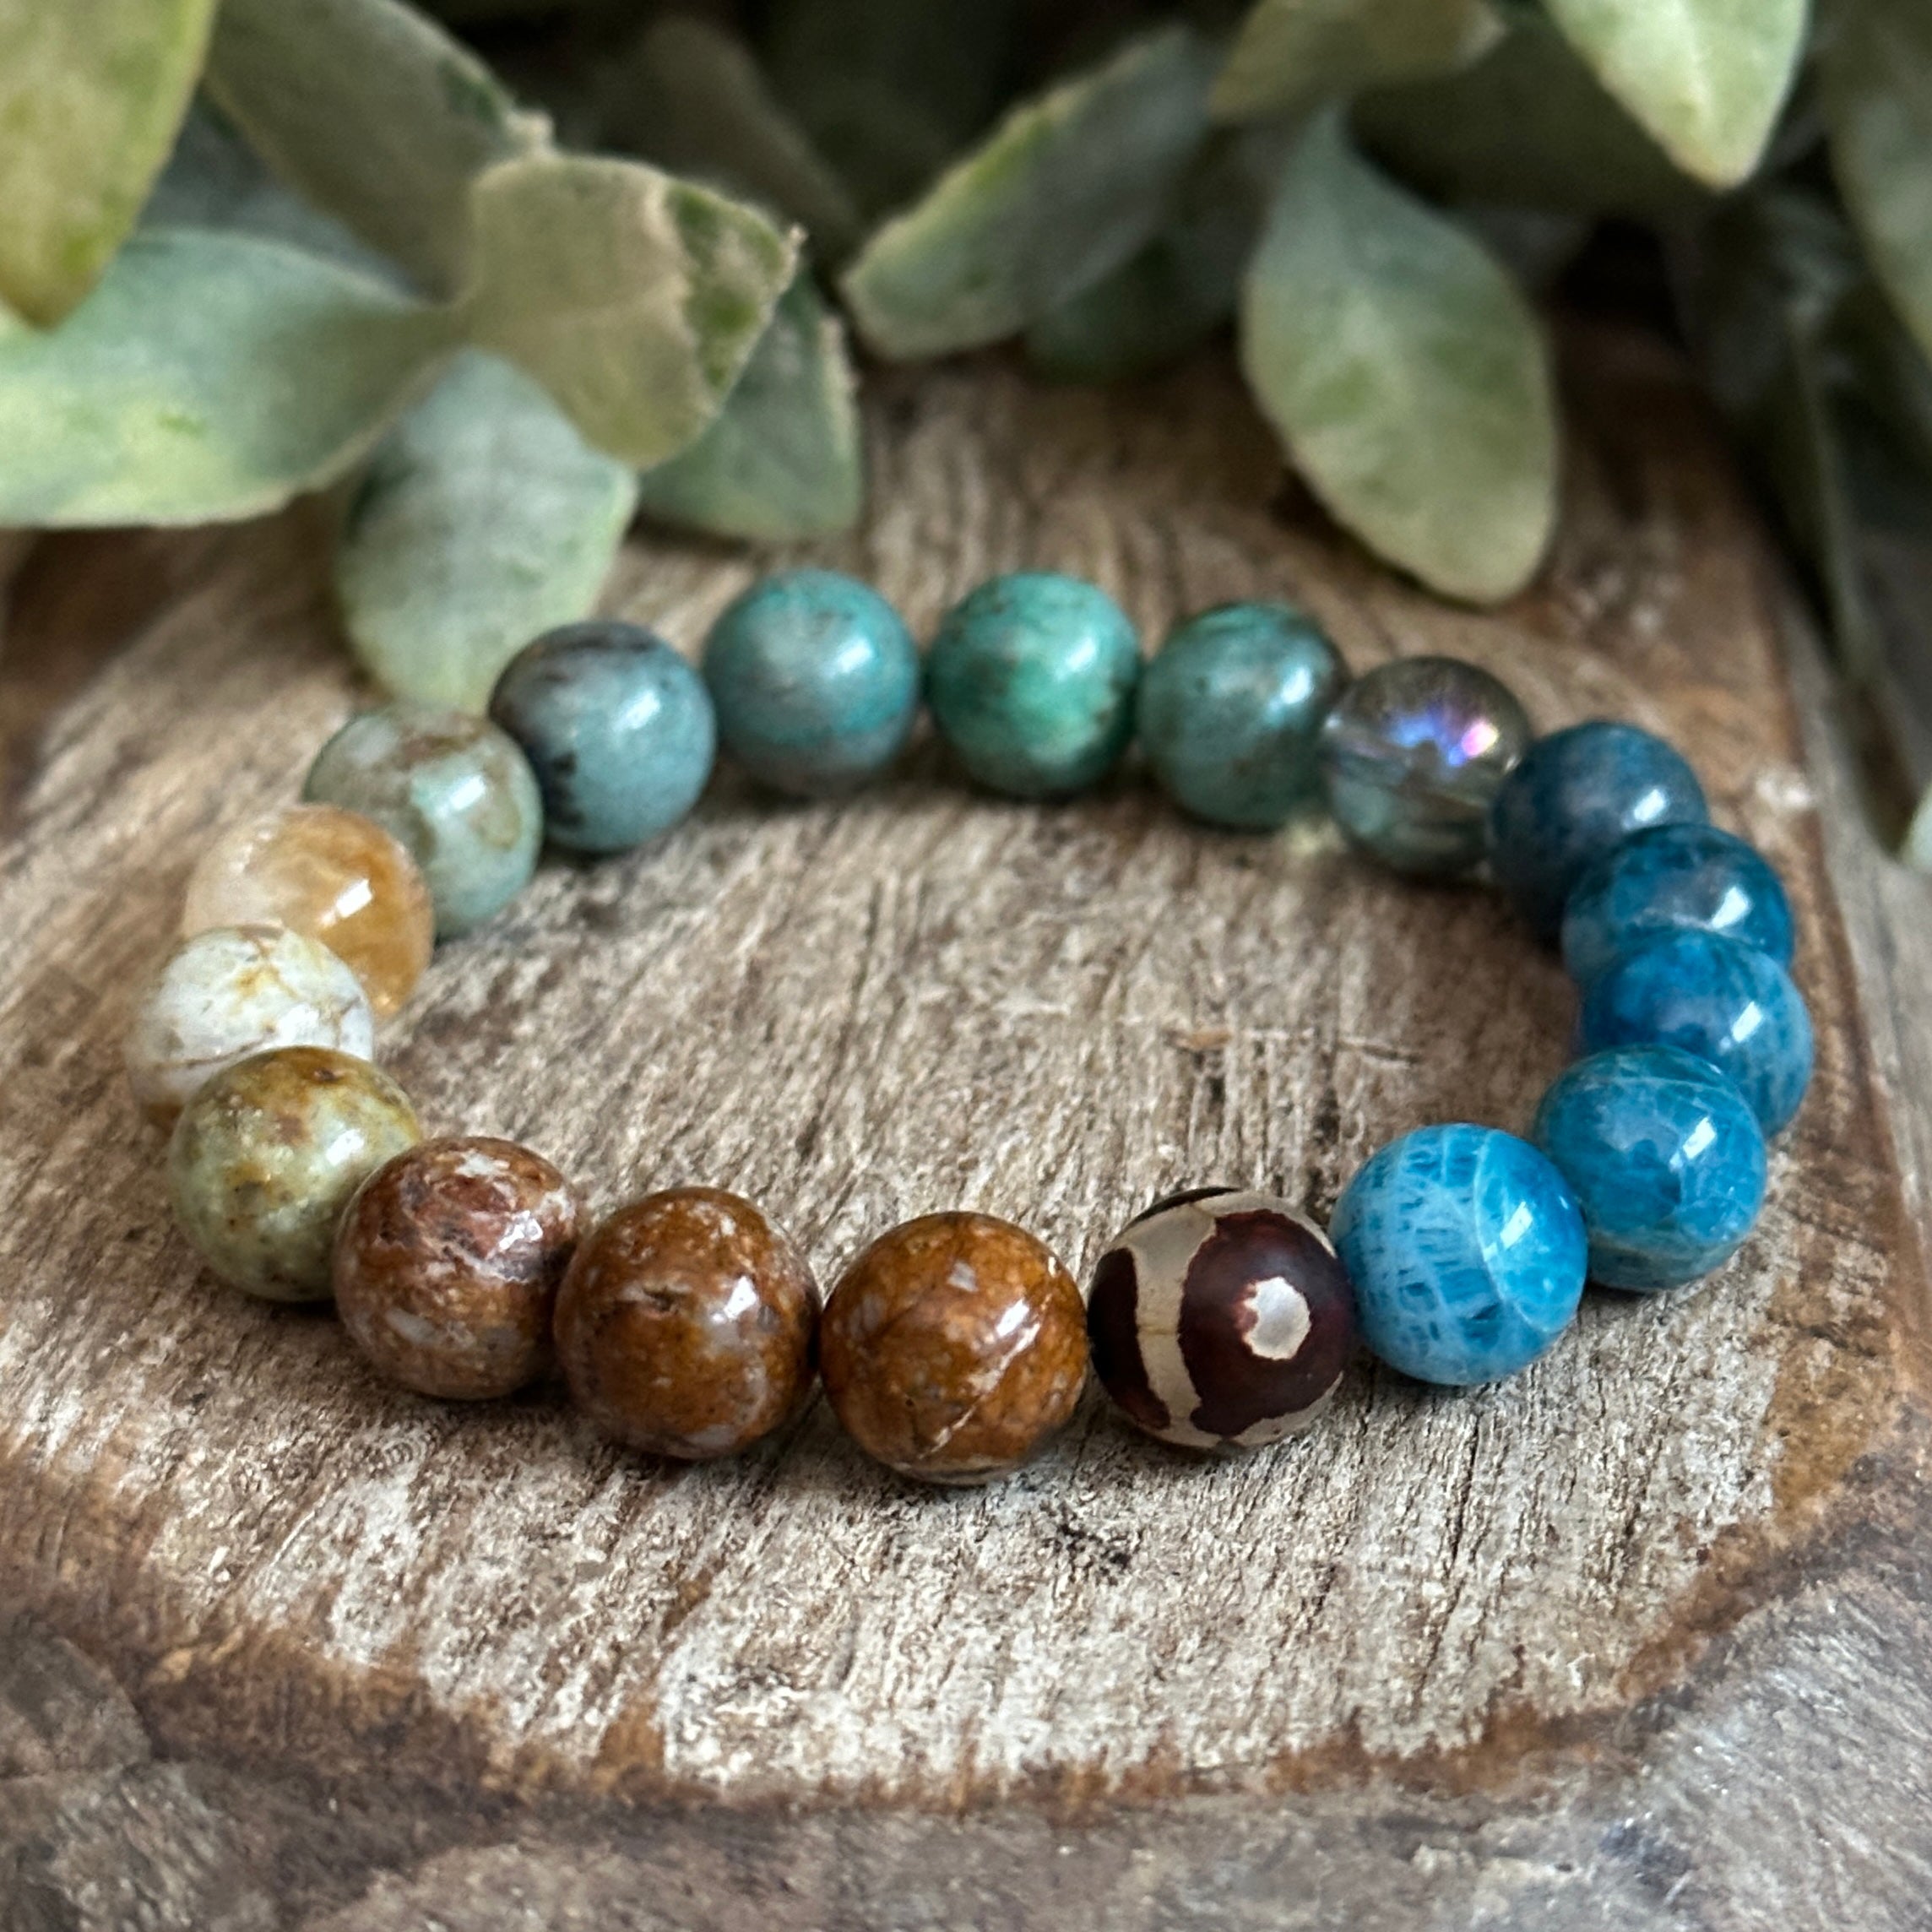 Healing health and recovery bracelets designed with crystals and gemstones.